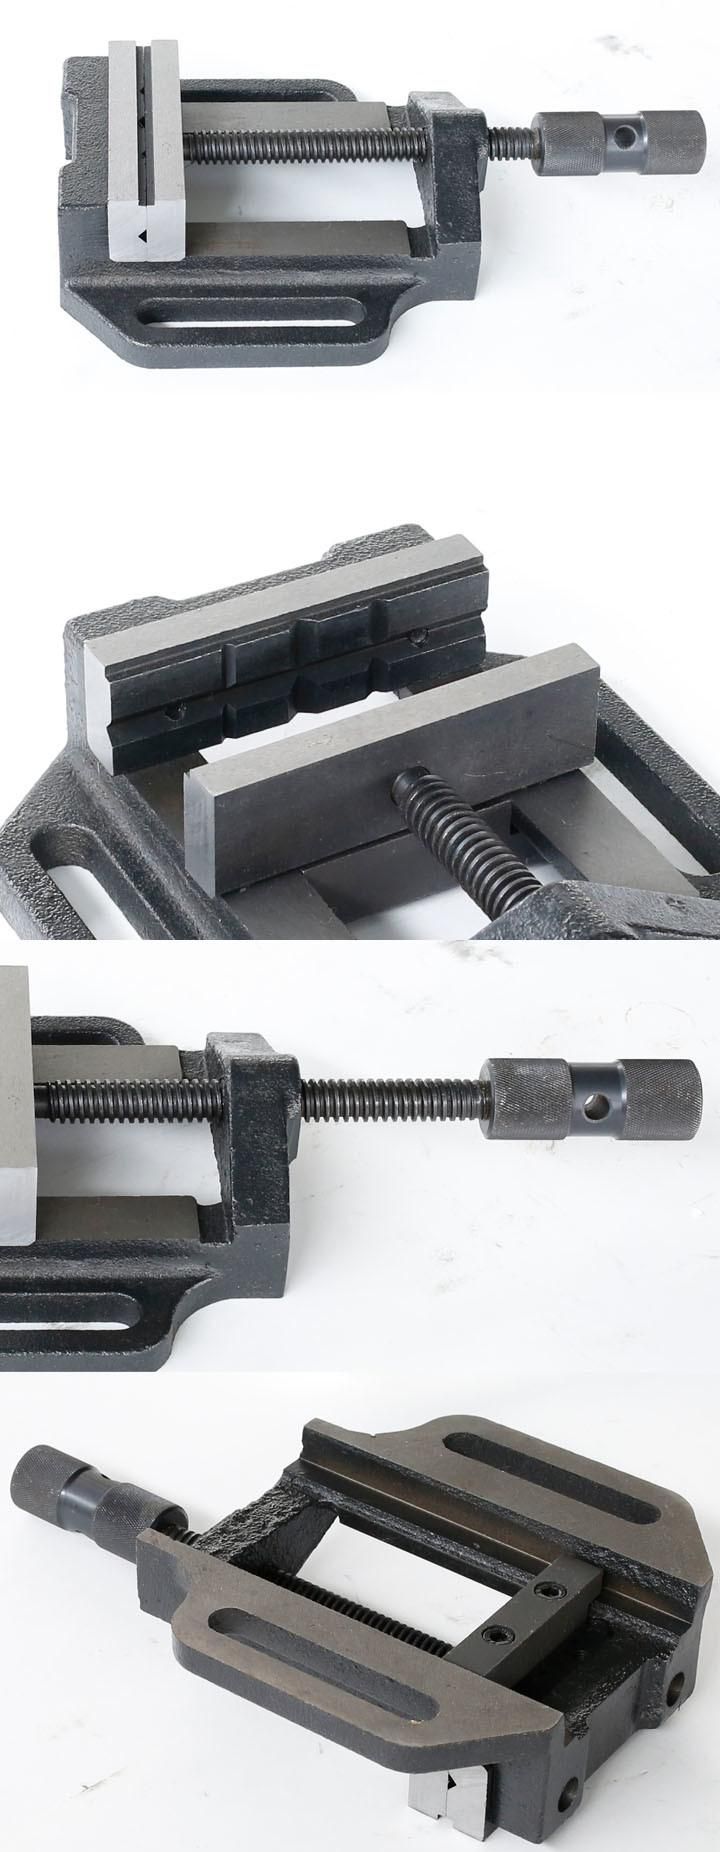 Drill Press Vise with Textured Jaws